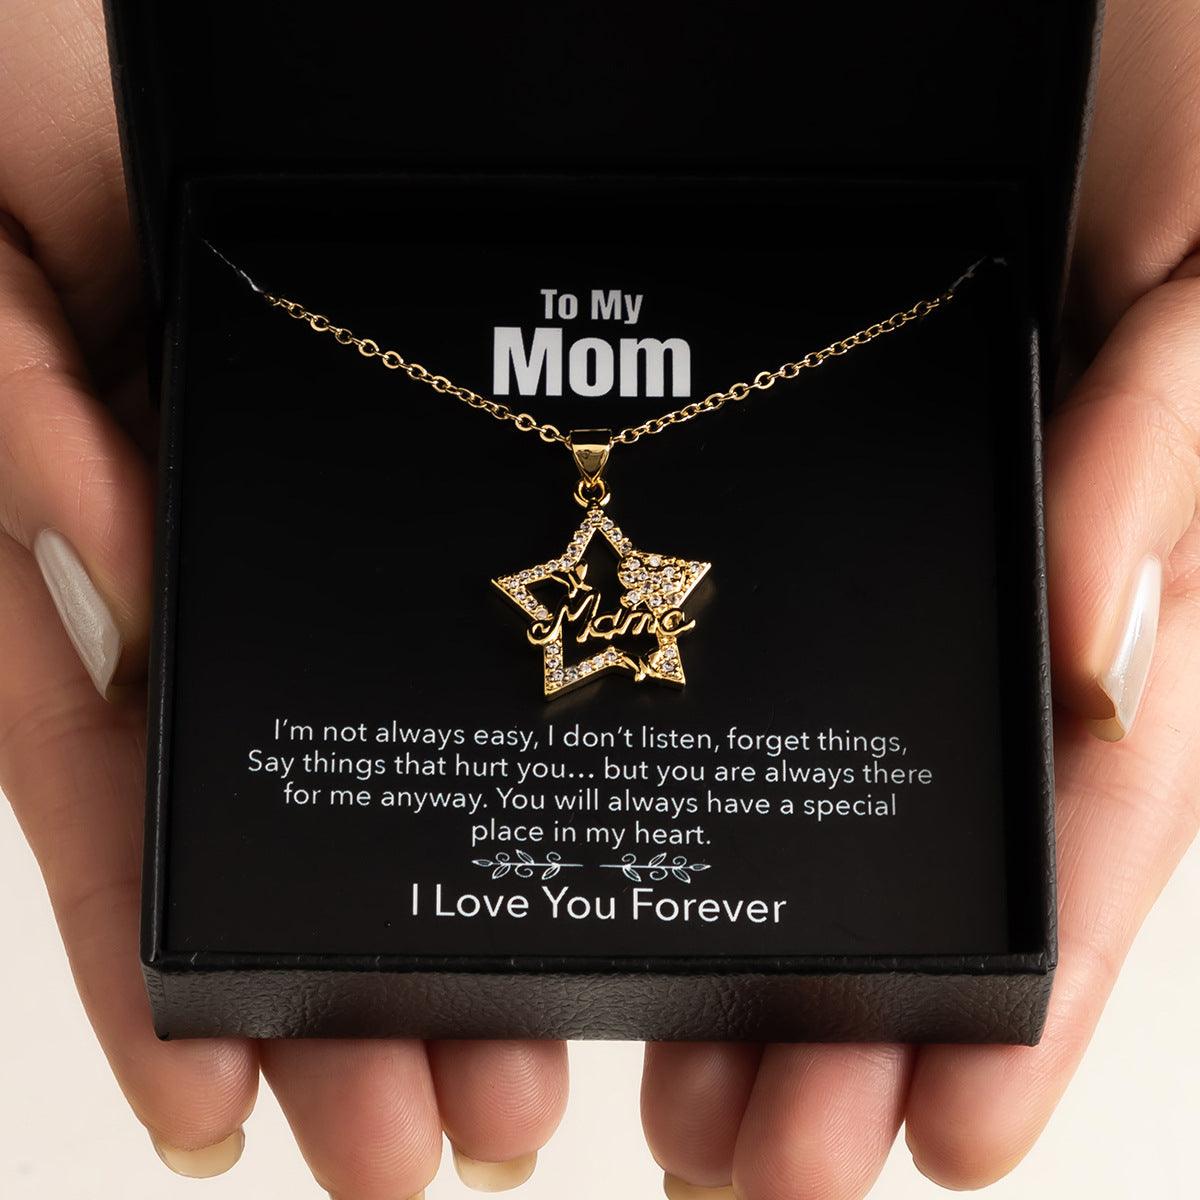 Mother's Day Necklace Gift Box Love Necklace For Women Fine Jewelry Women Accessories Fashion Jewelry - TechTrendzNz